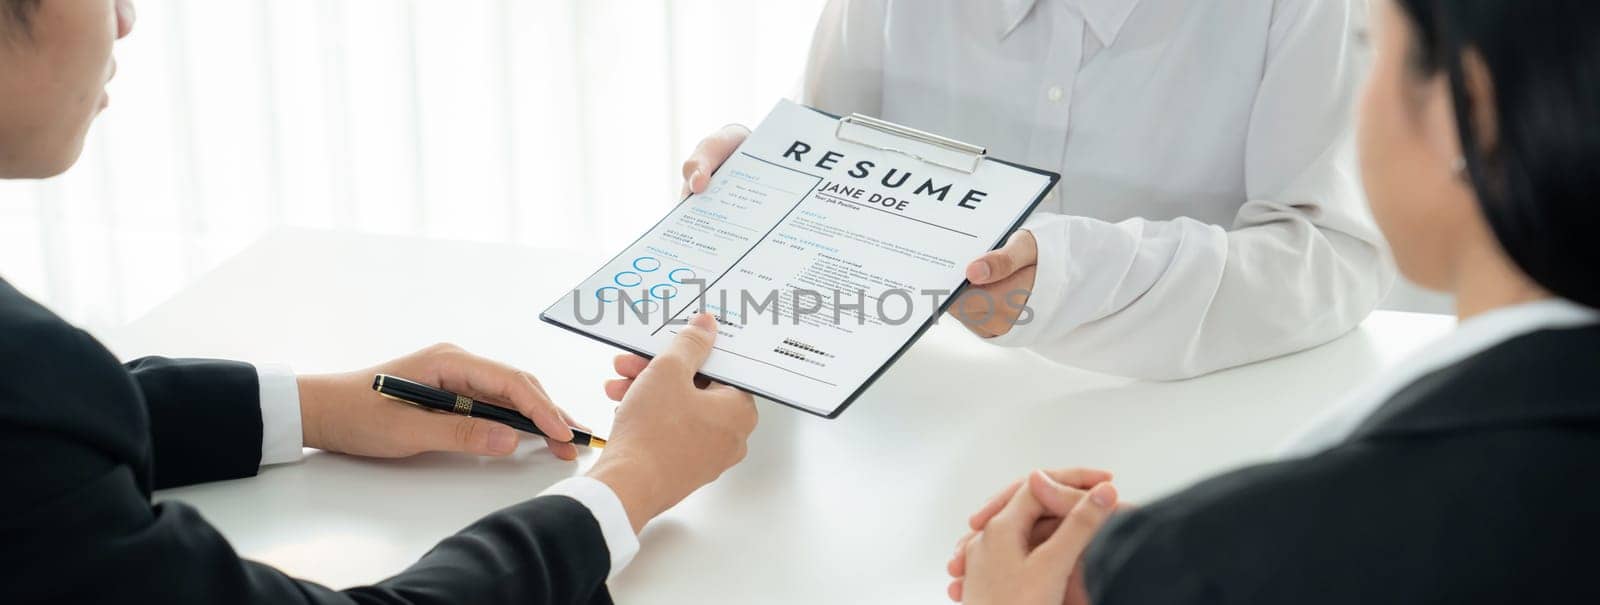 Corporate recruiter interview job applicant to discuss career goal and assess resume and experience. Job interview appointment for career opportunity and HR manager concept. Panorama Shrewd